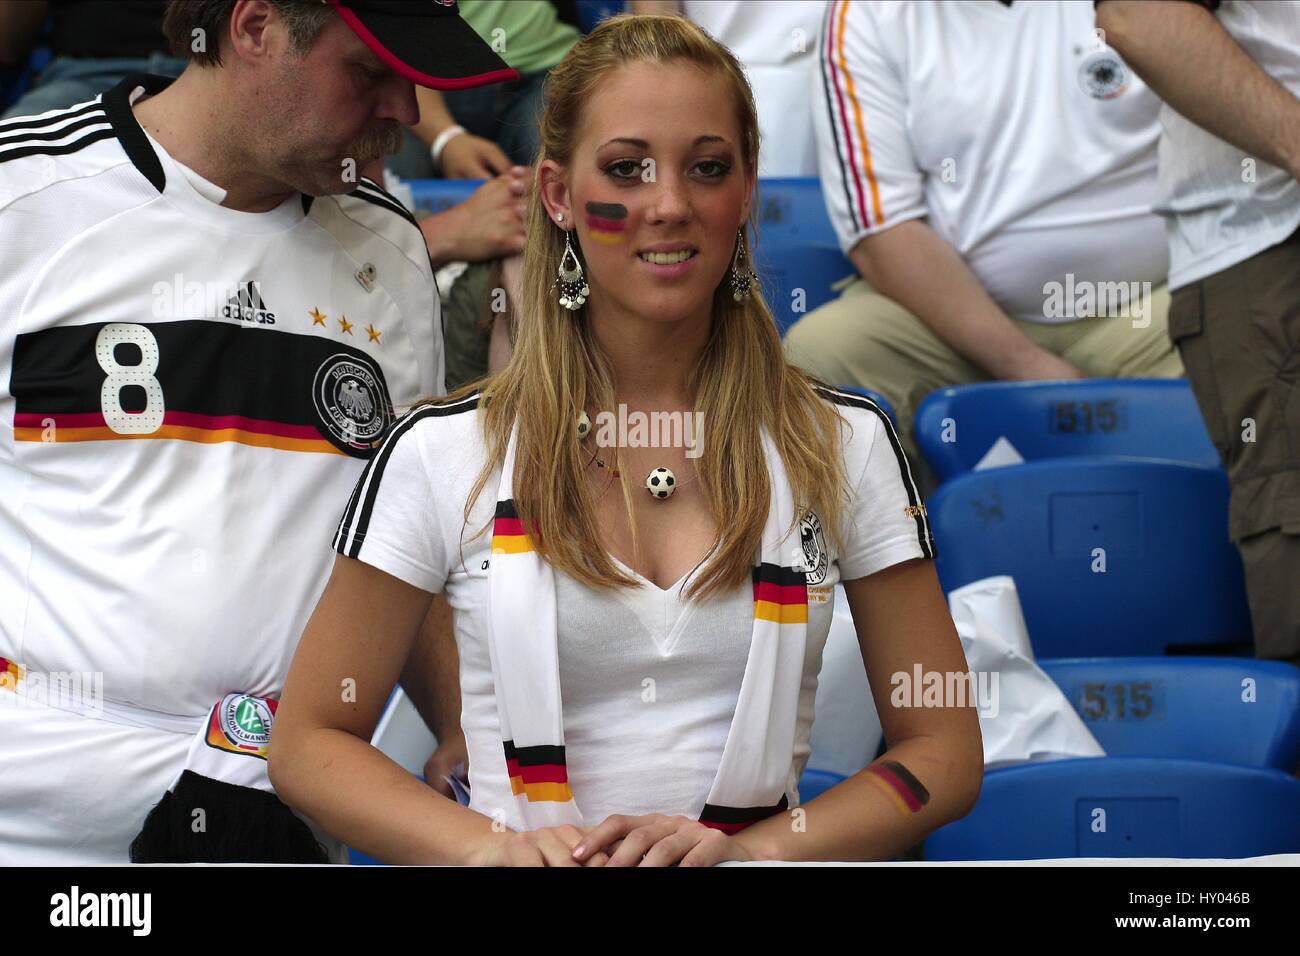 Female Switzerland Fan High Resolution Stock Photography and Images - Alamy